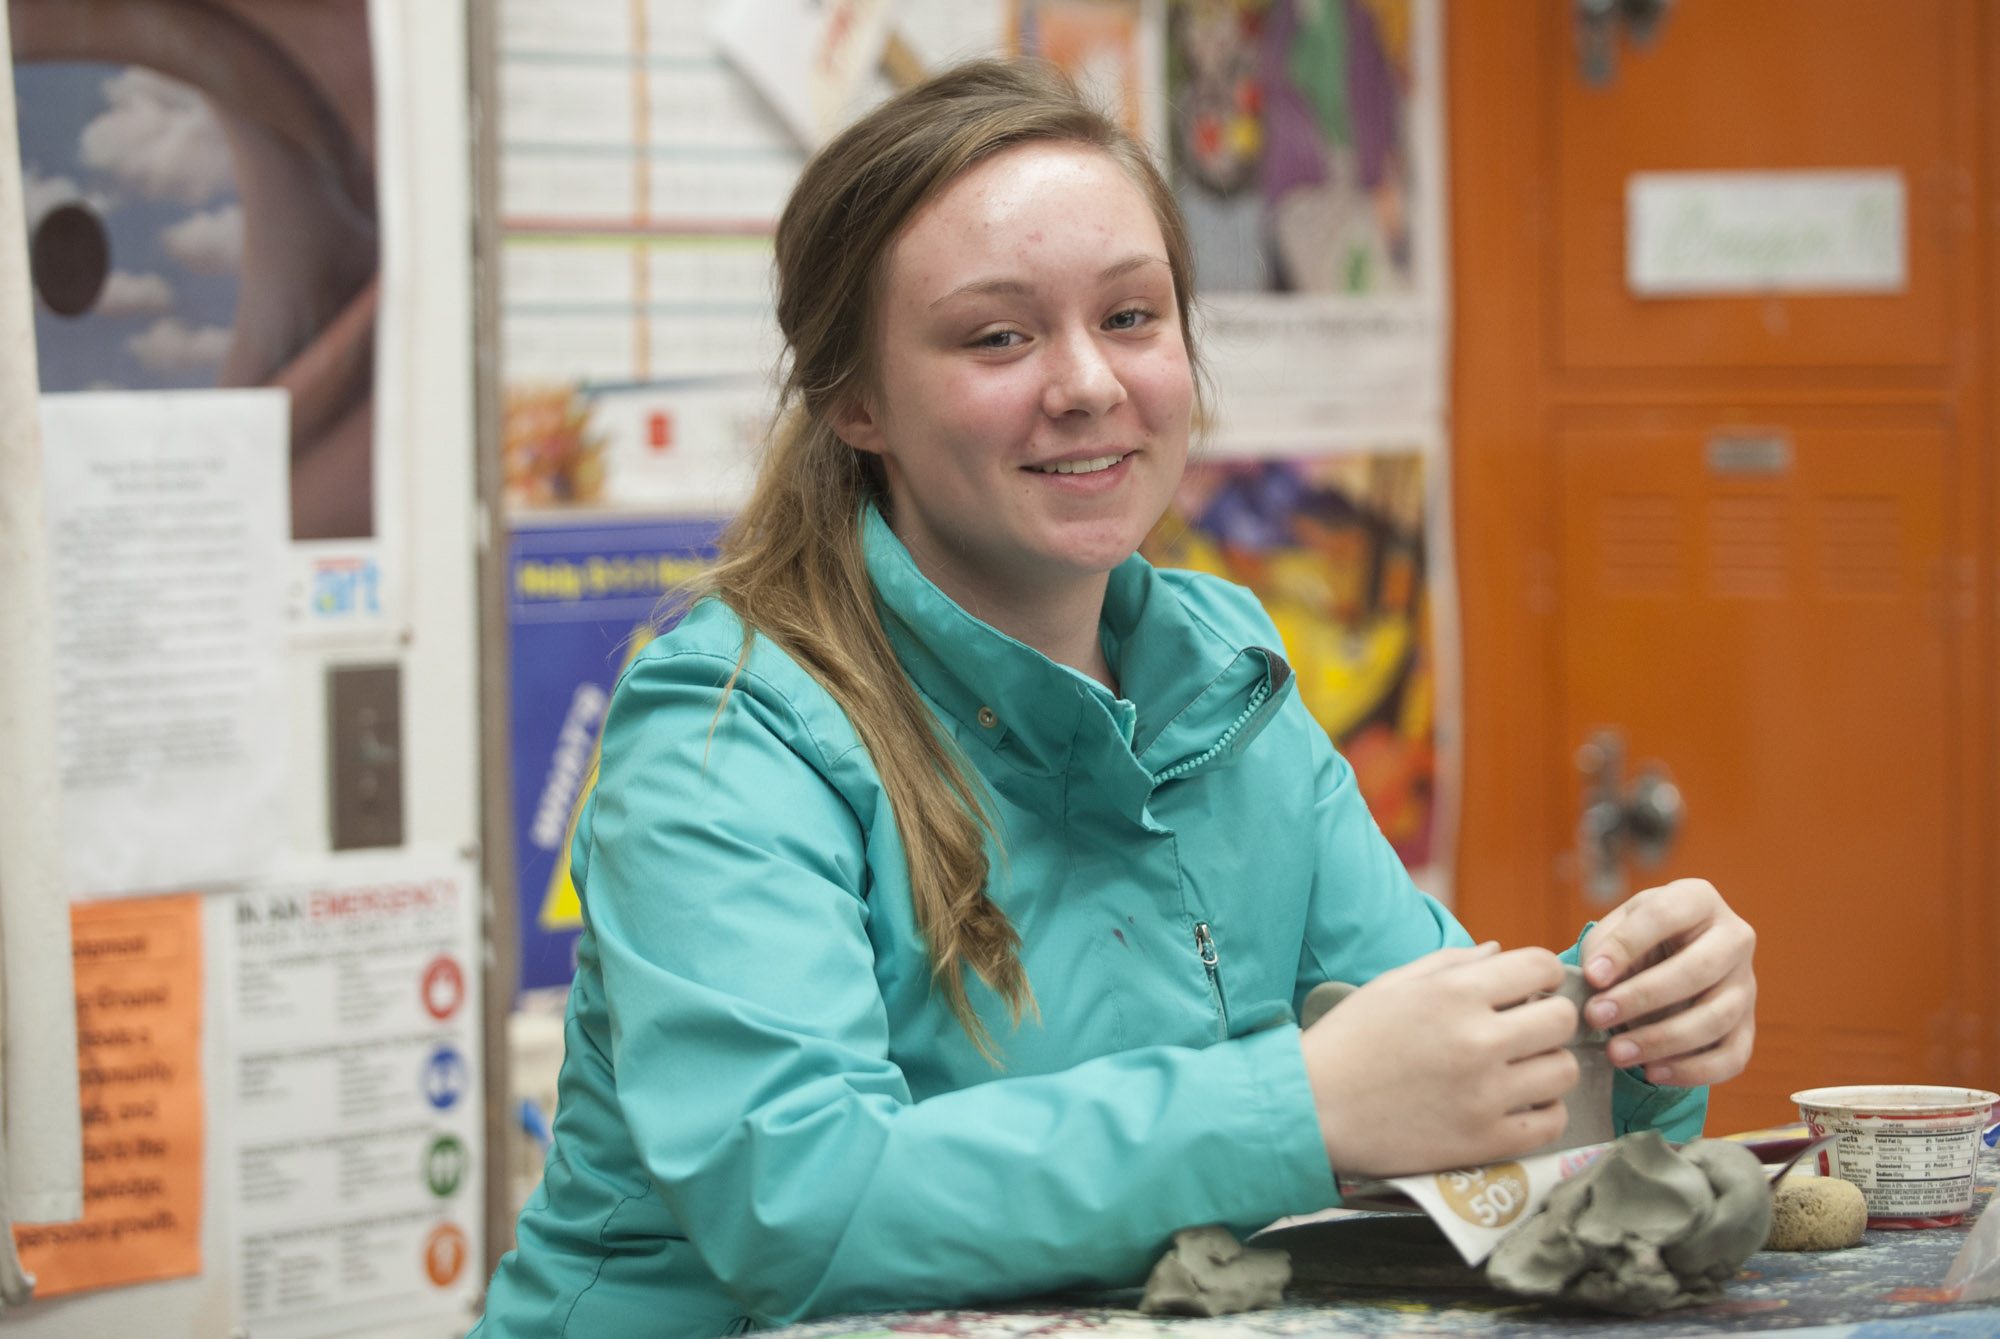 Student Holly Halberg sculpts with clay in her art class at Battle Ground High School earlier this month. She is the state winner in the Doodle 4 Google contest. Online voting will determine whether her artwork advances to the top five in the national contest.